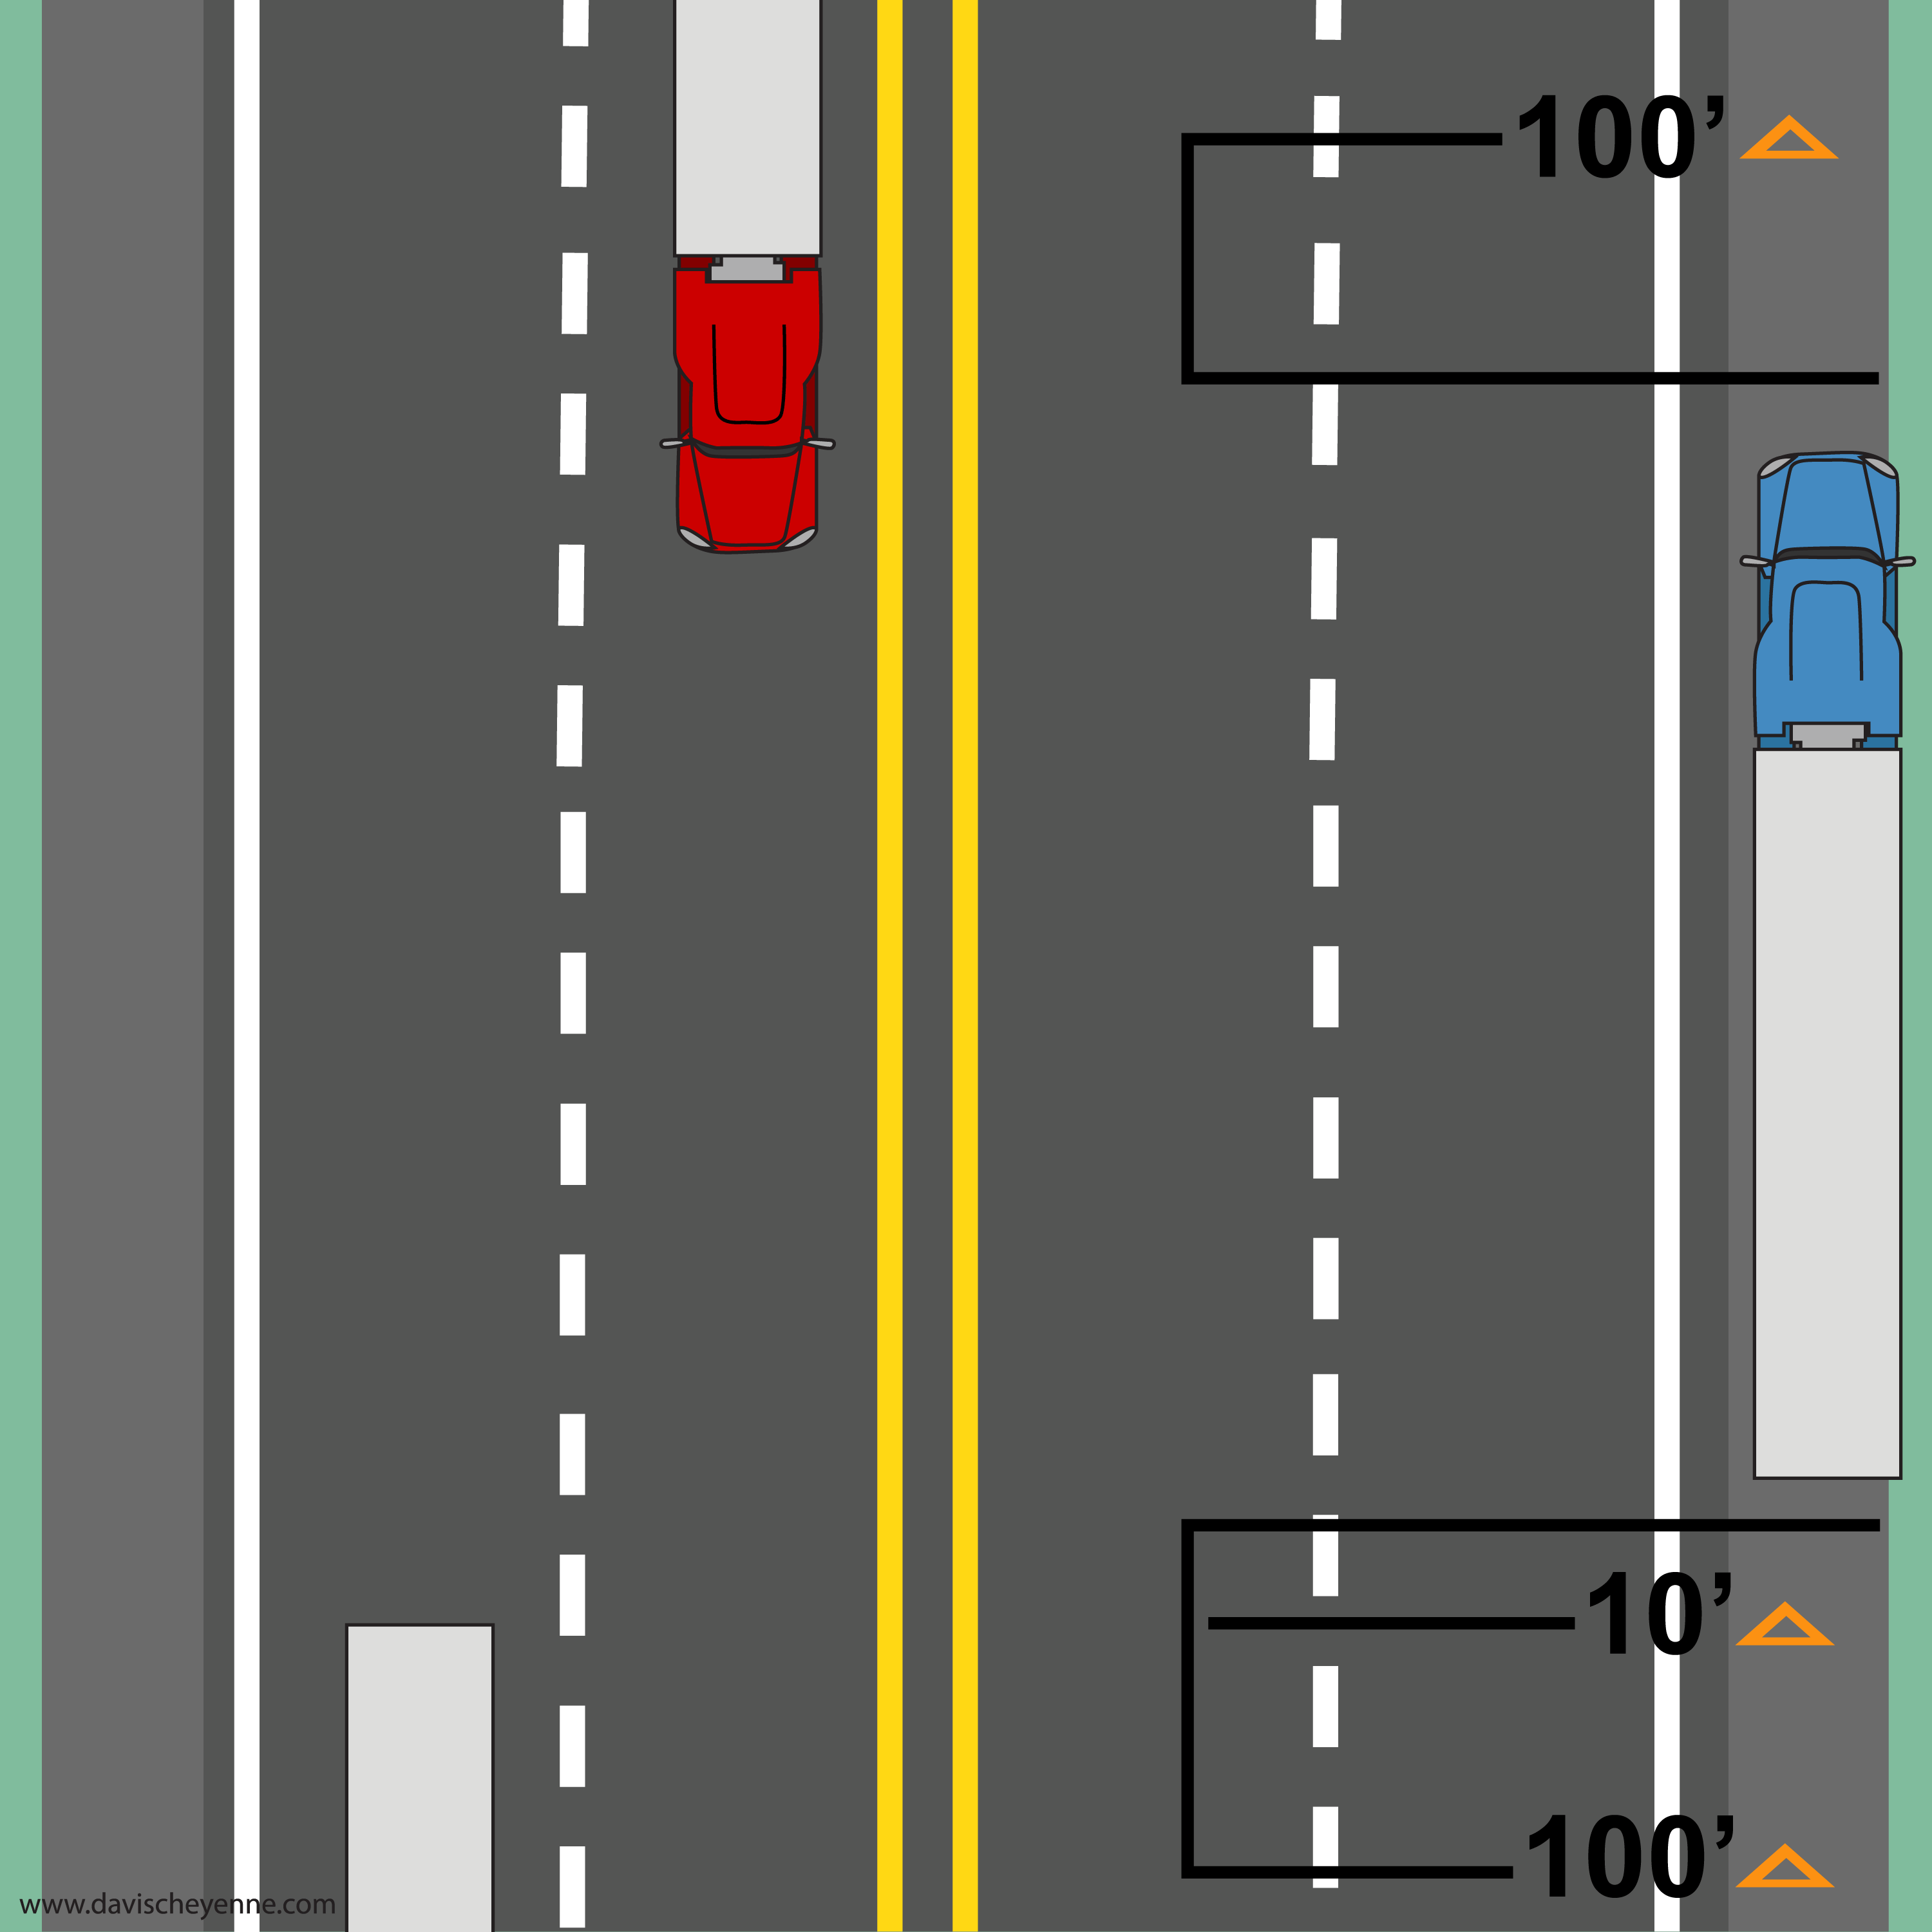 Undivided Highway Triangle Placement CDL Manual